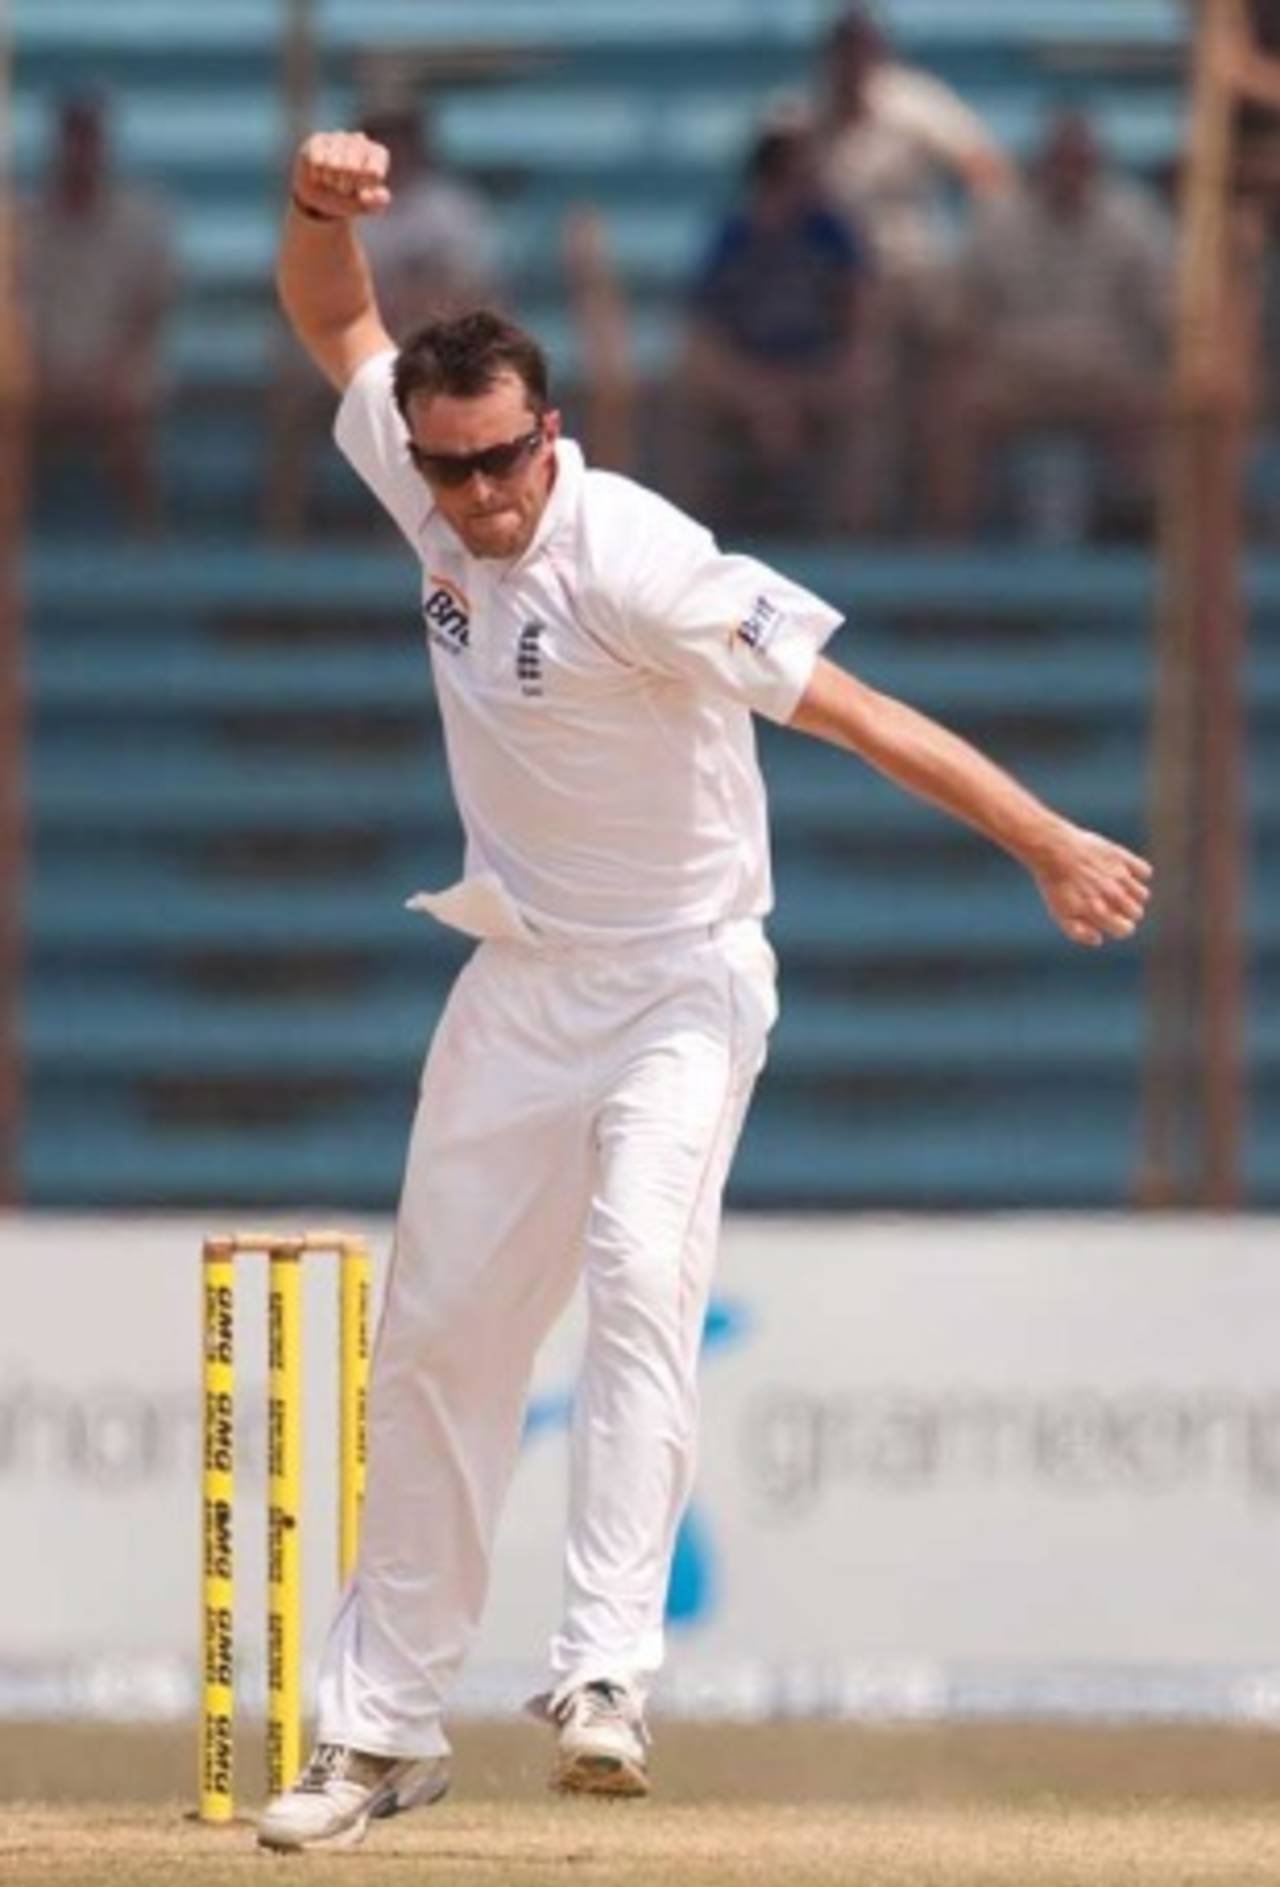 Graeme Swann struck in his second over to remove Tamim Iqbal, Bangladesh v England, 1st Test, Chittagong, March 15, 2010